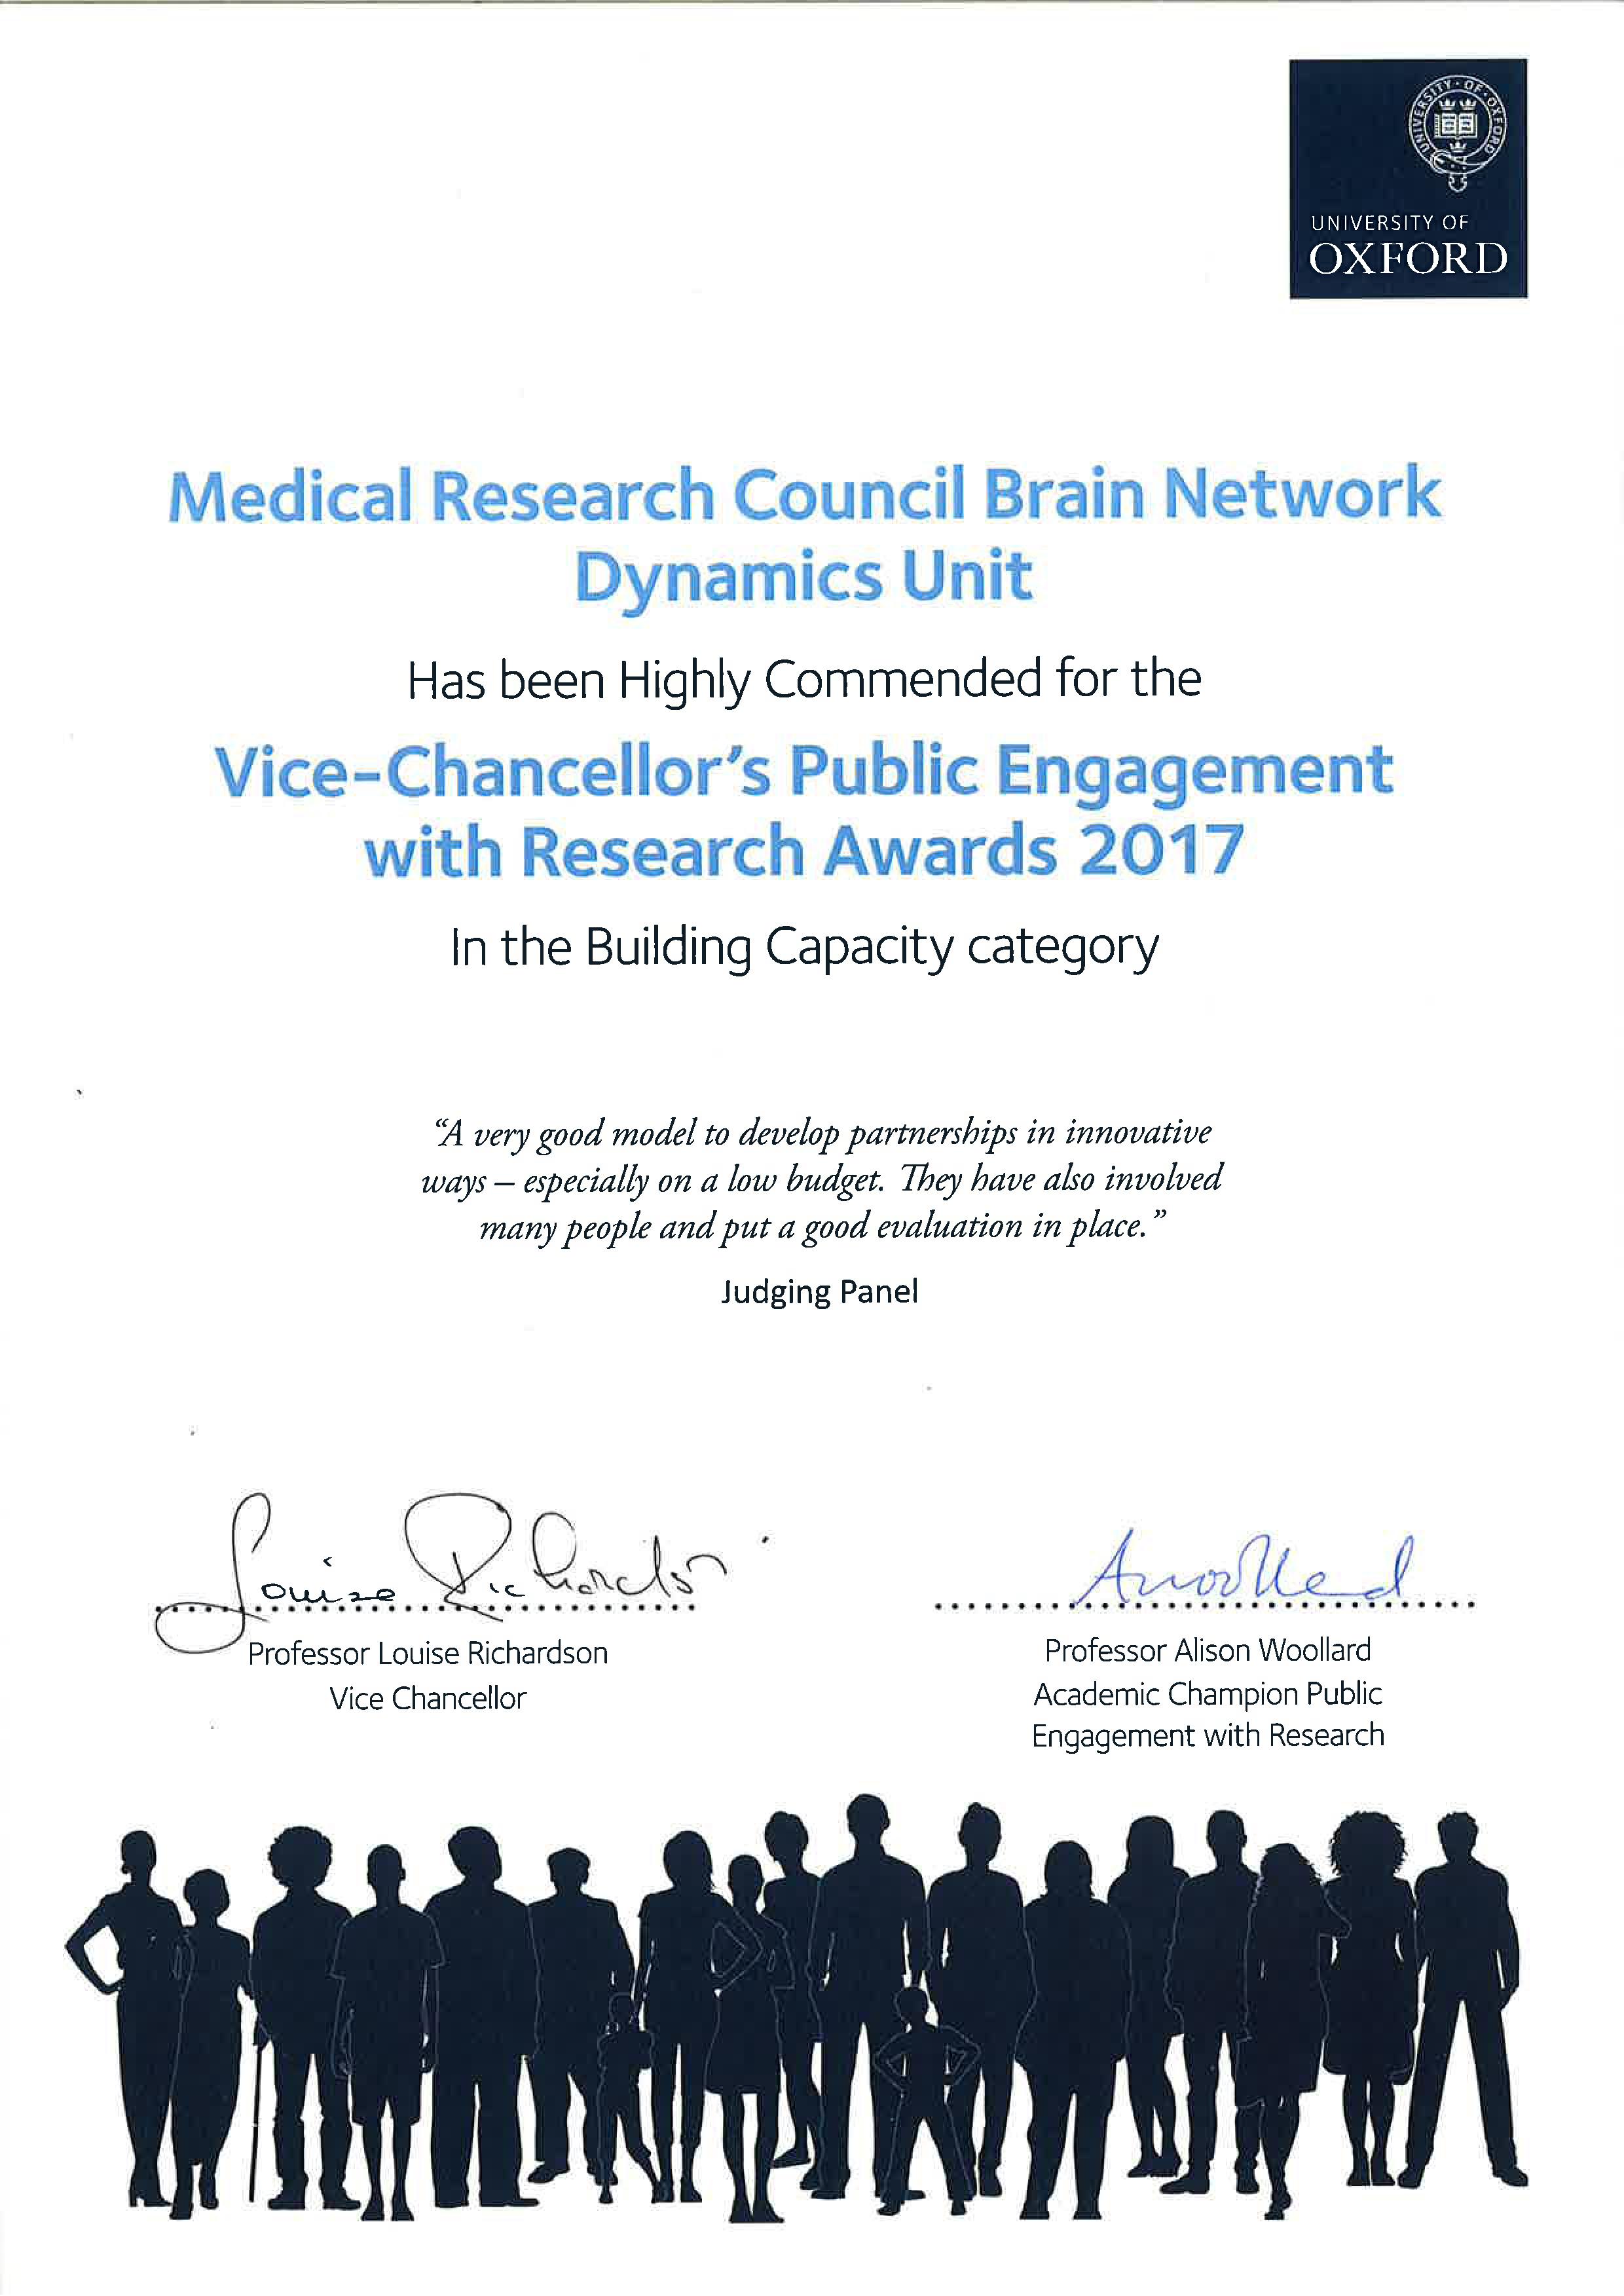 Certificate given in recognition of the Unit’s achievements in Public Engagement with Research